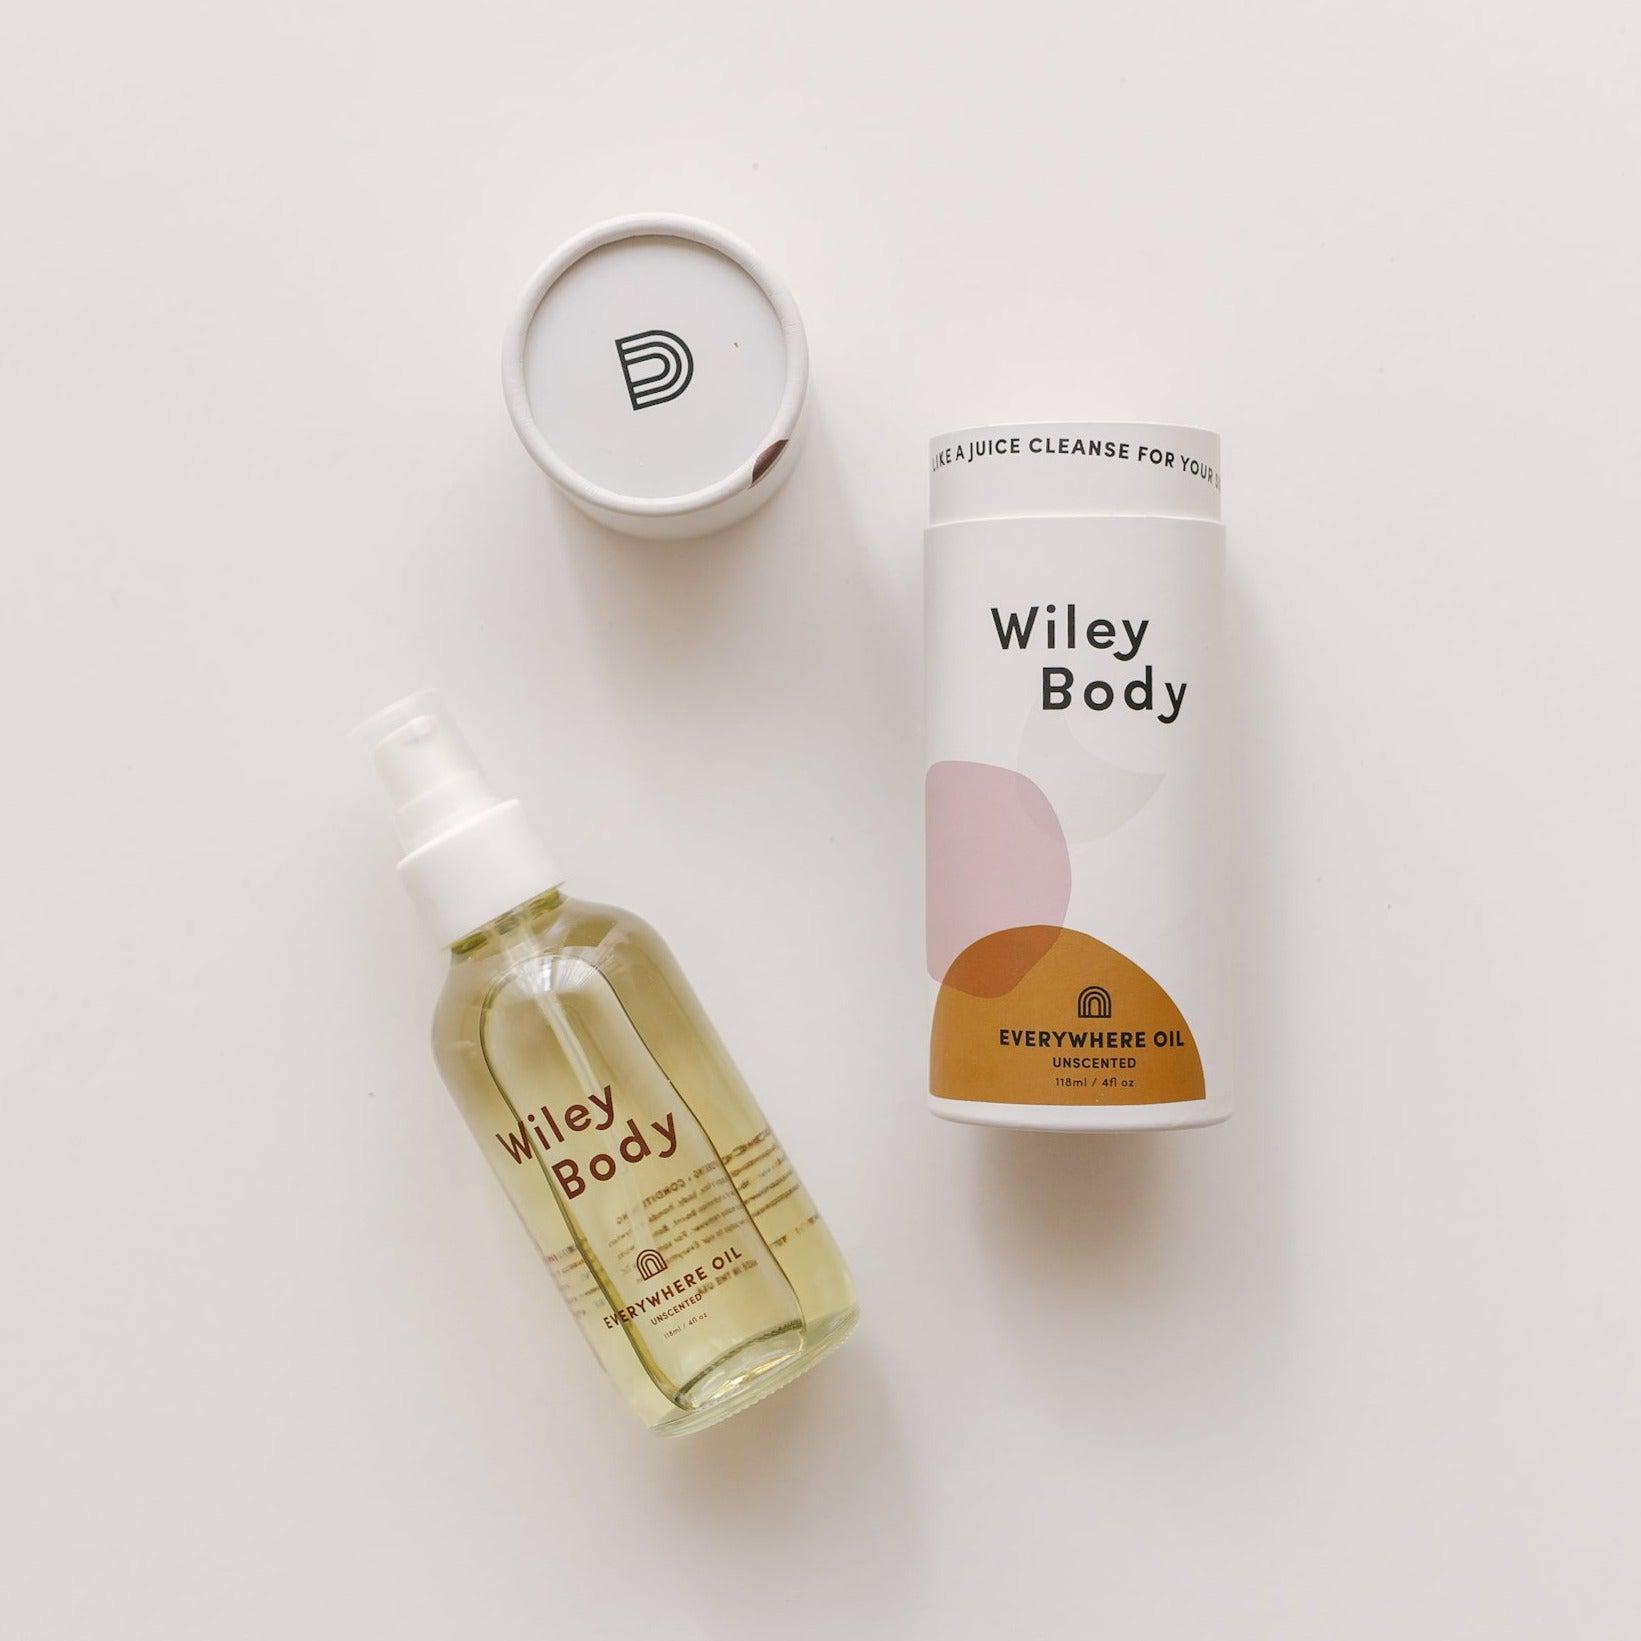 A nourishing Wiley Body bottle of everywhere oil and a moisturizing Wiley Body bottle of everywhere oil next to each other.